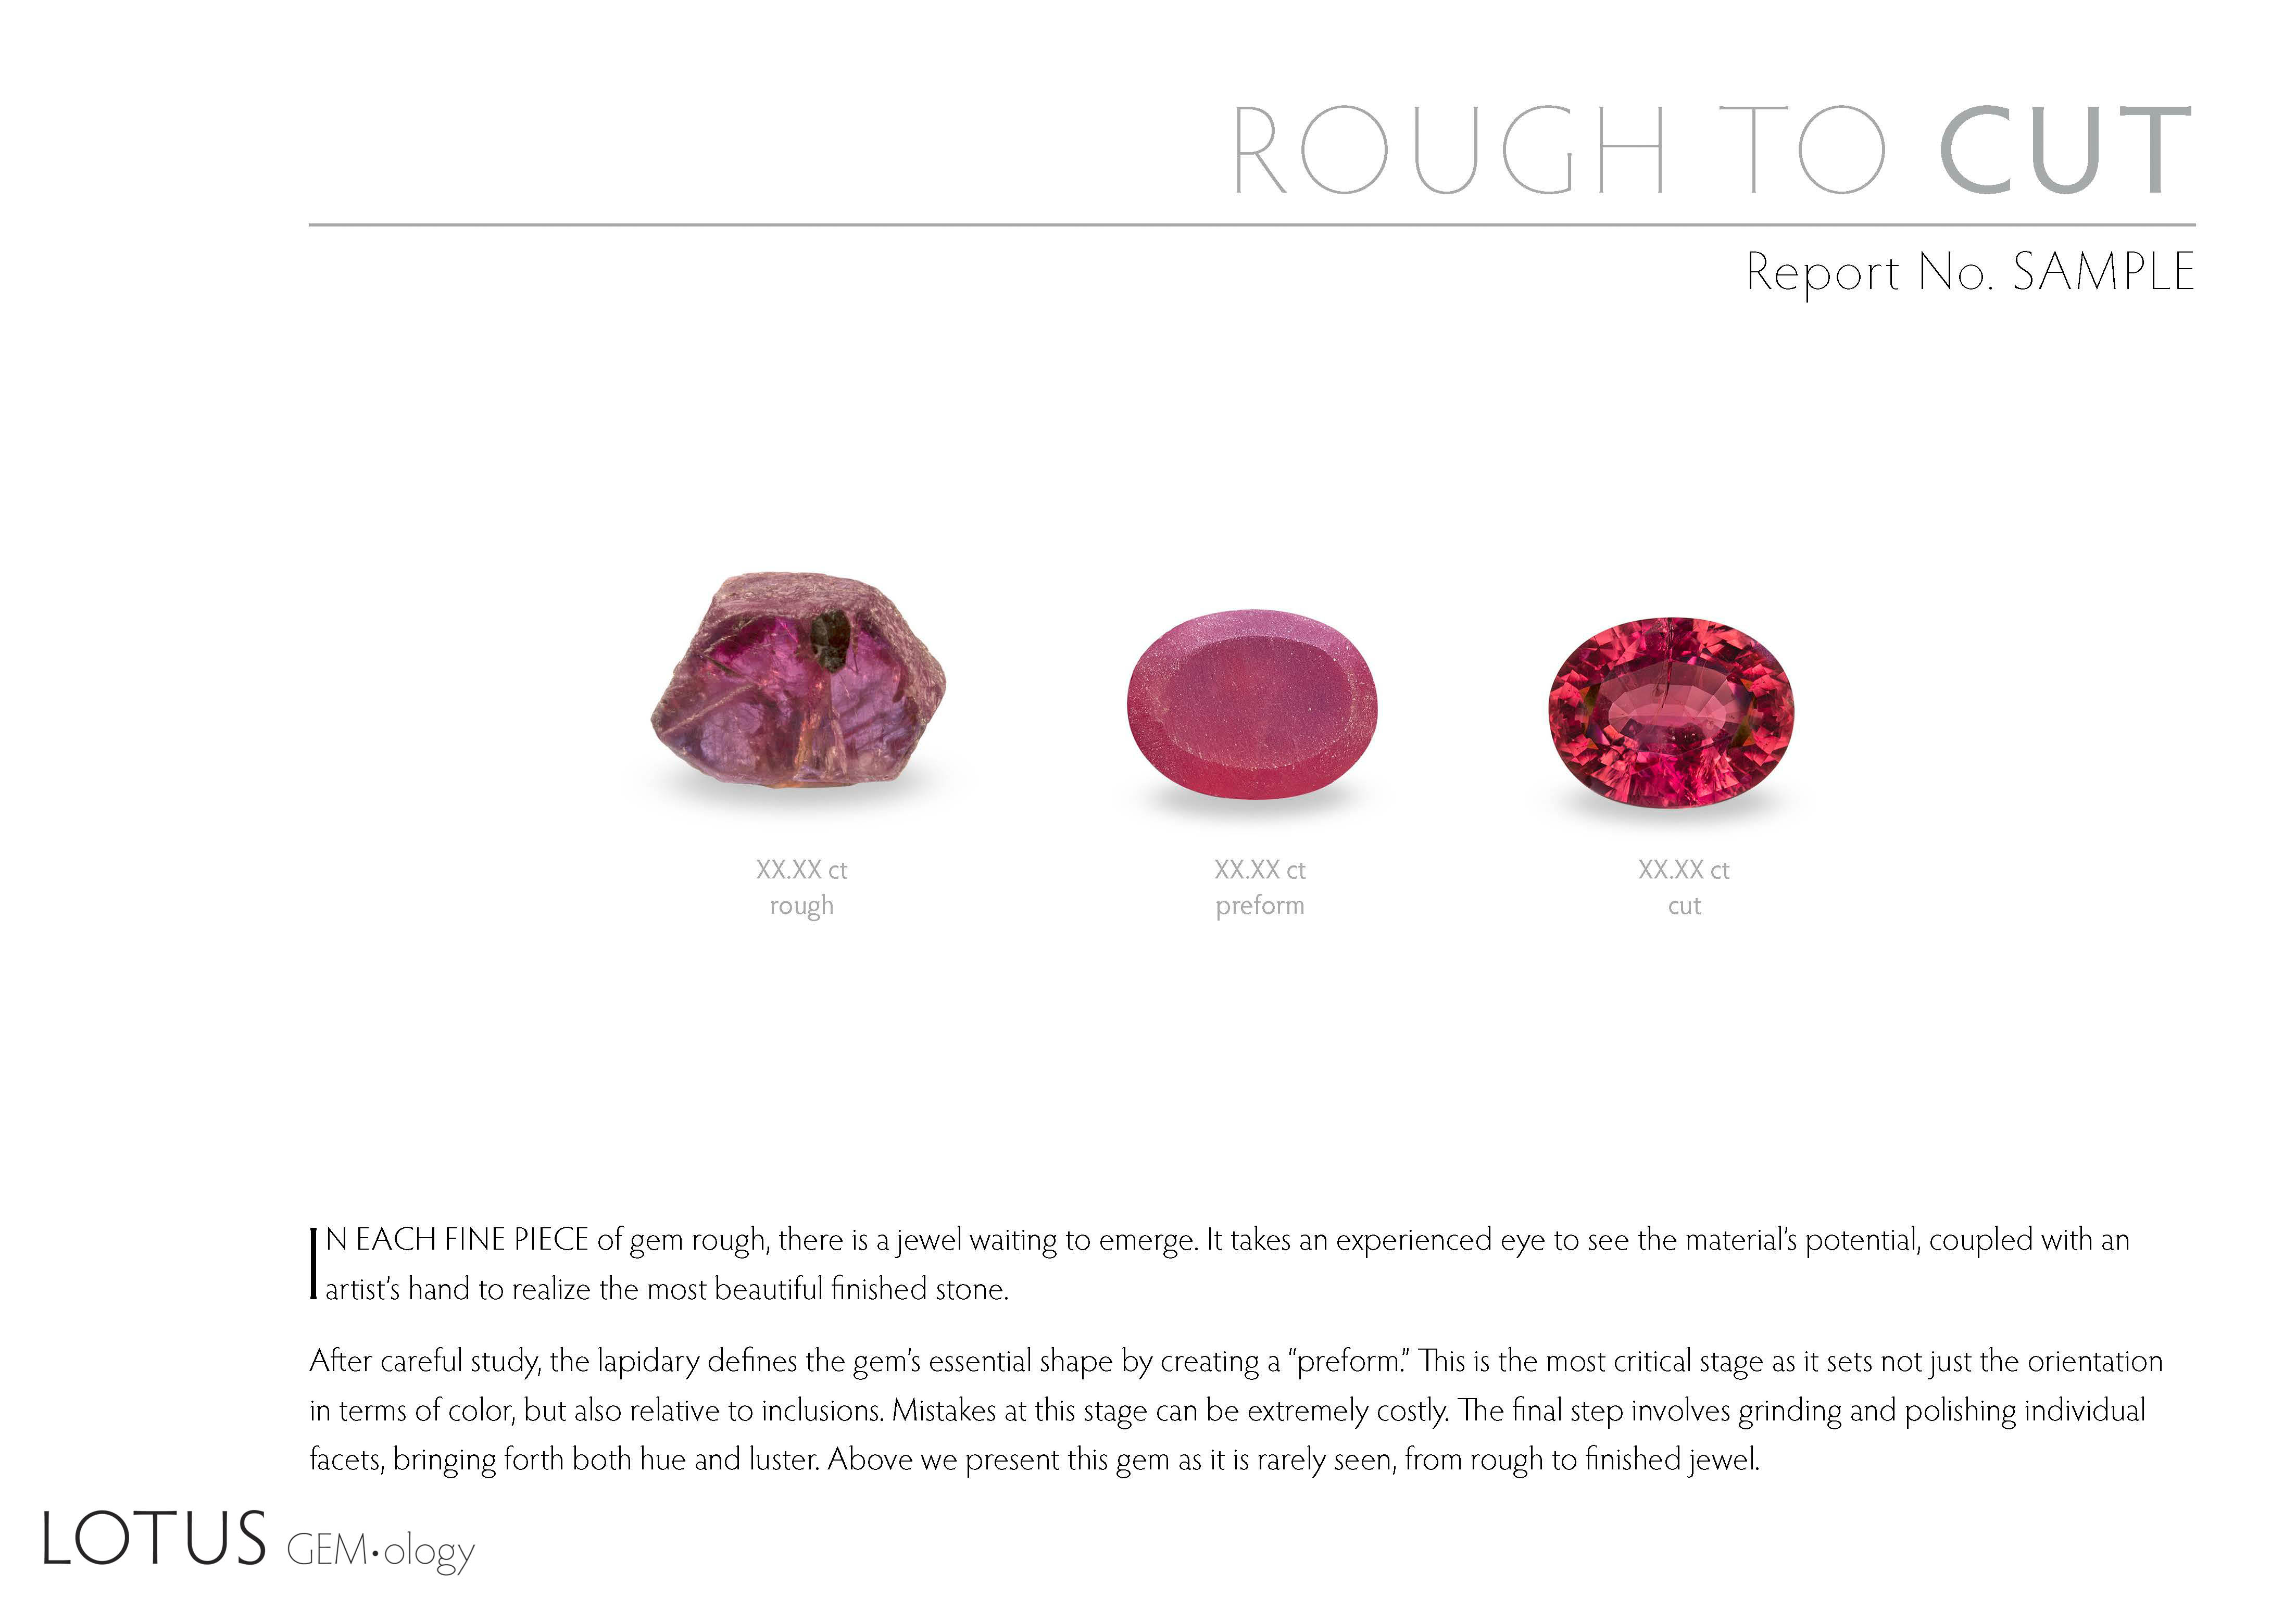 Opt for the addition of a "Rough to Cut" layout to hardcover reports to display the journey a stone goes through from rough to finished gem.